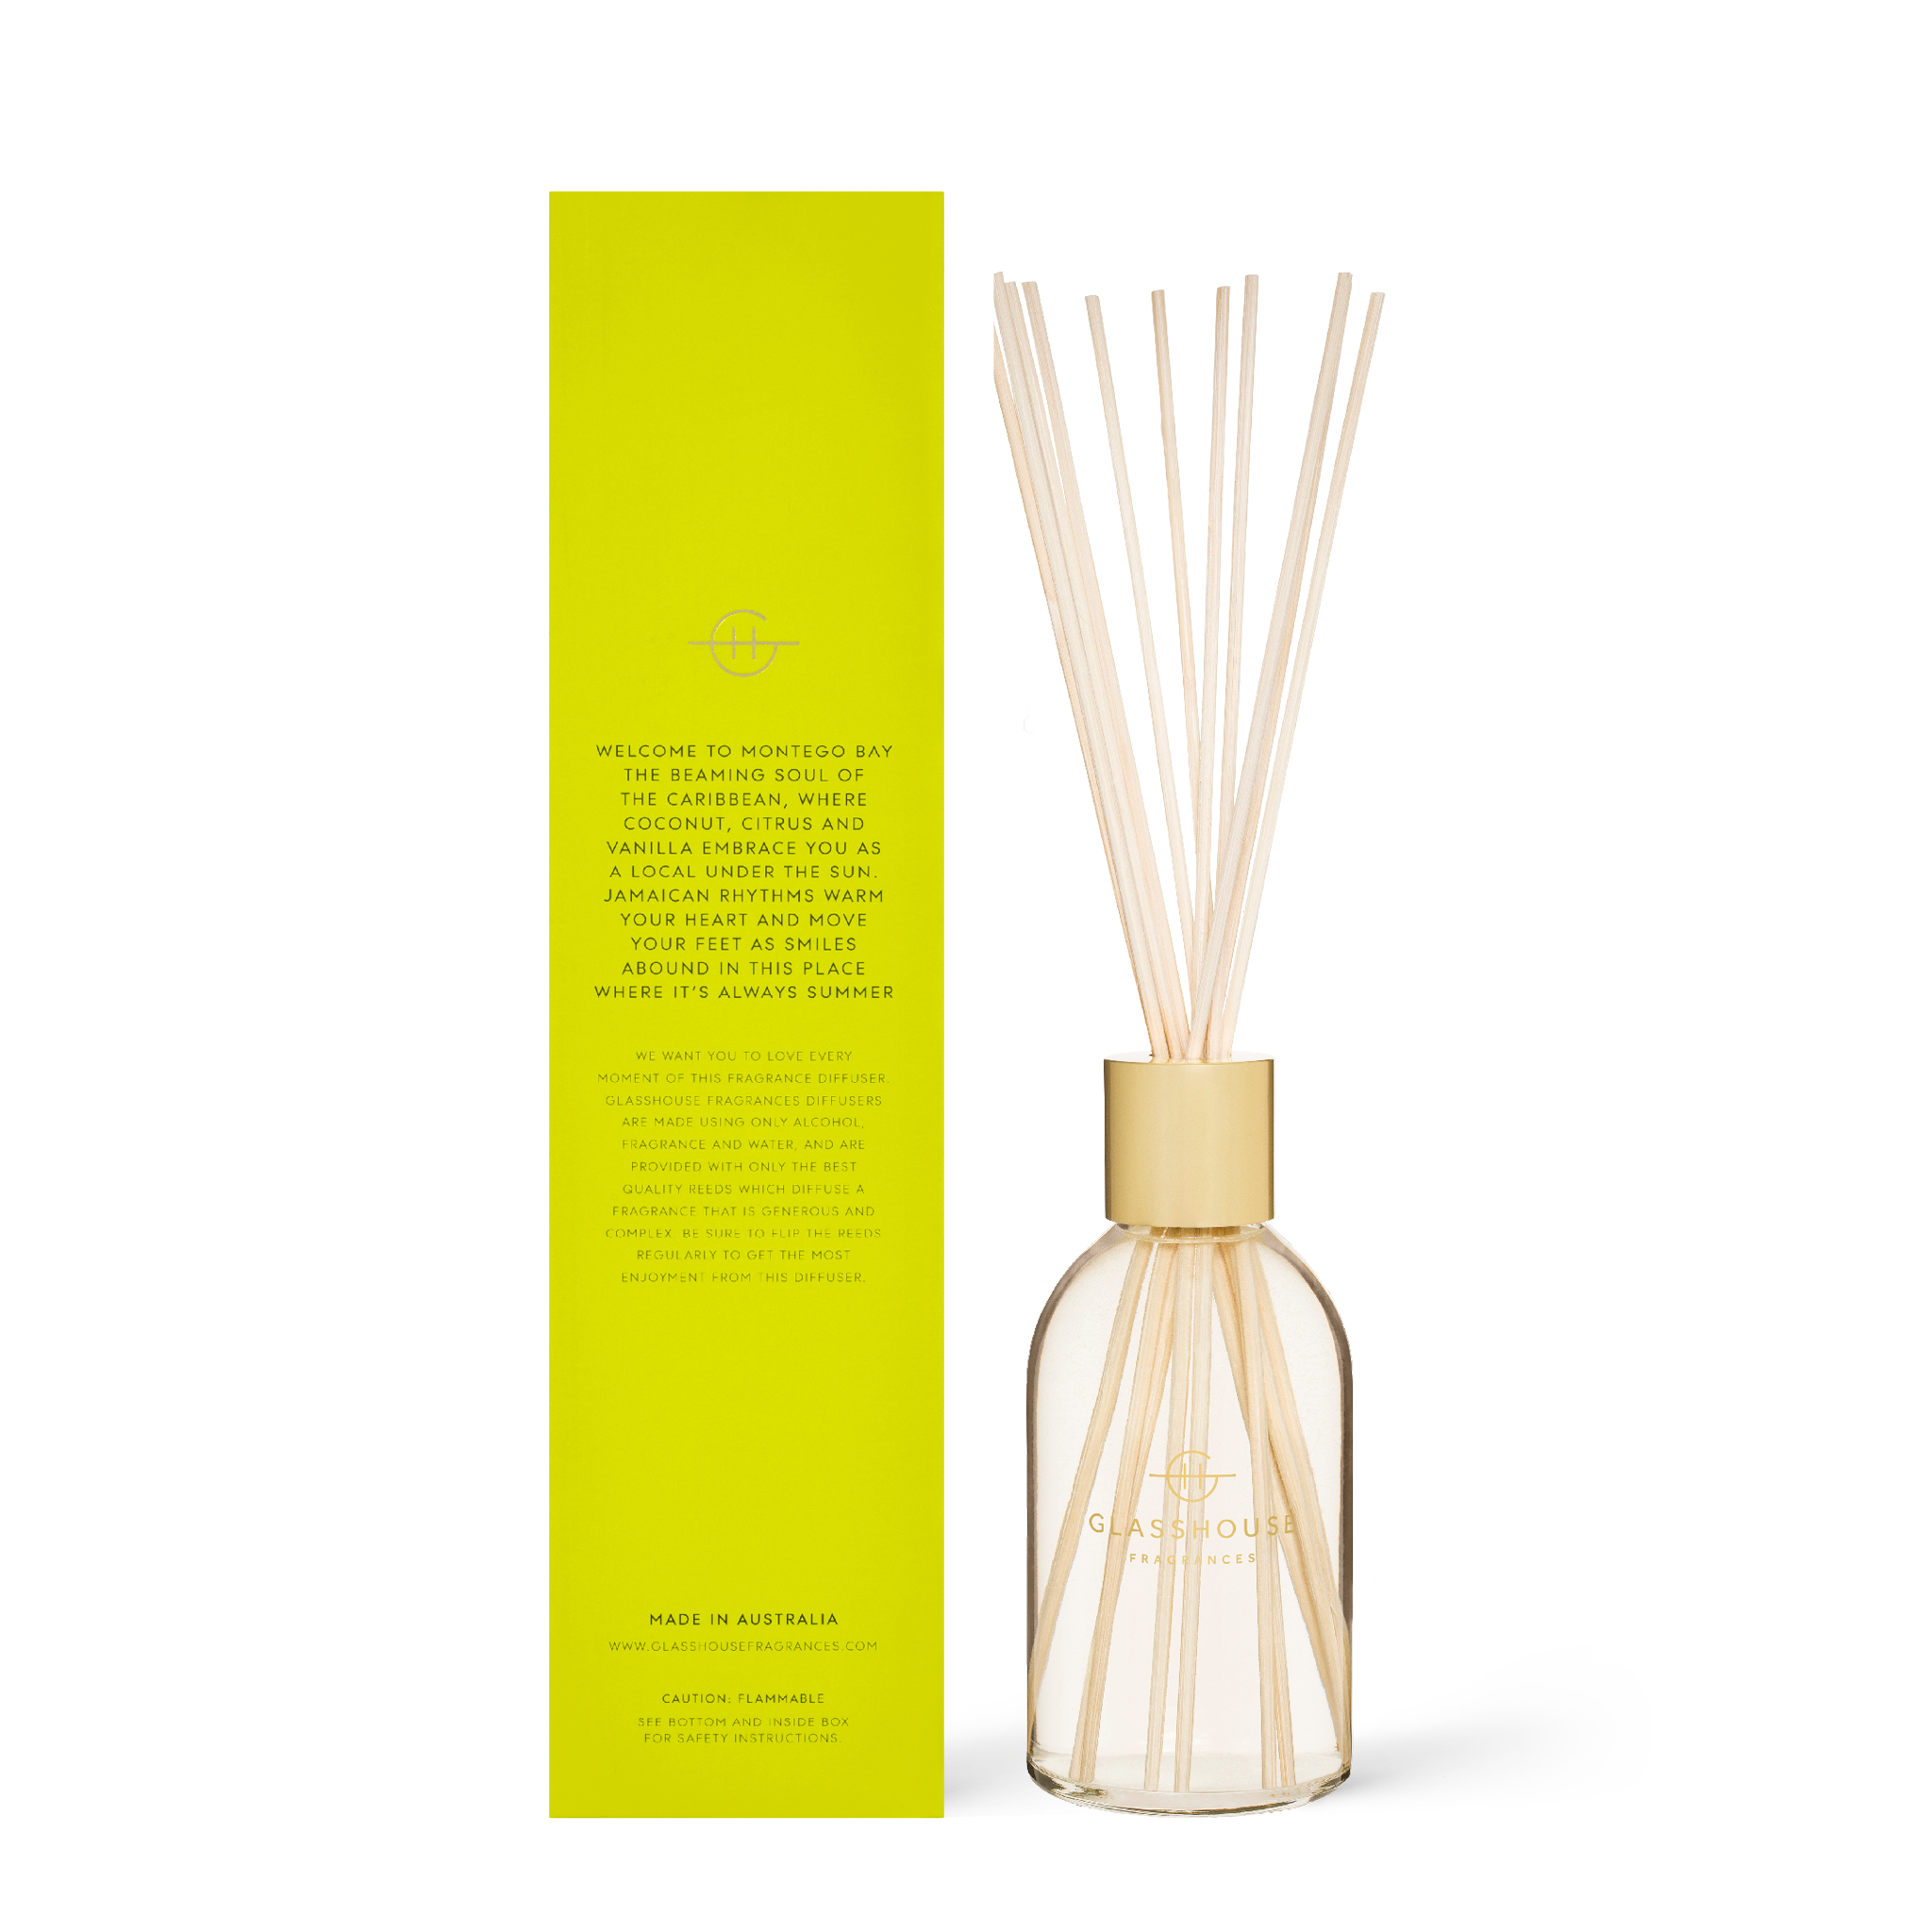 Glasshouse Fragrances Montego Bay Rhythm Coconut and Lime 250mL Fragrance Diffuser with box - back of product shot